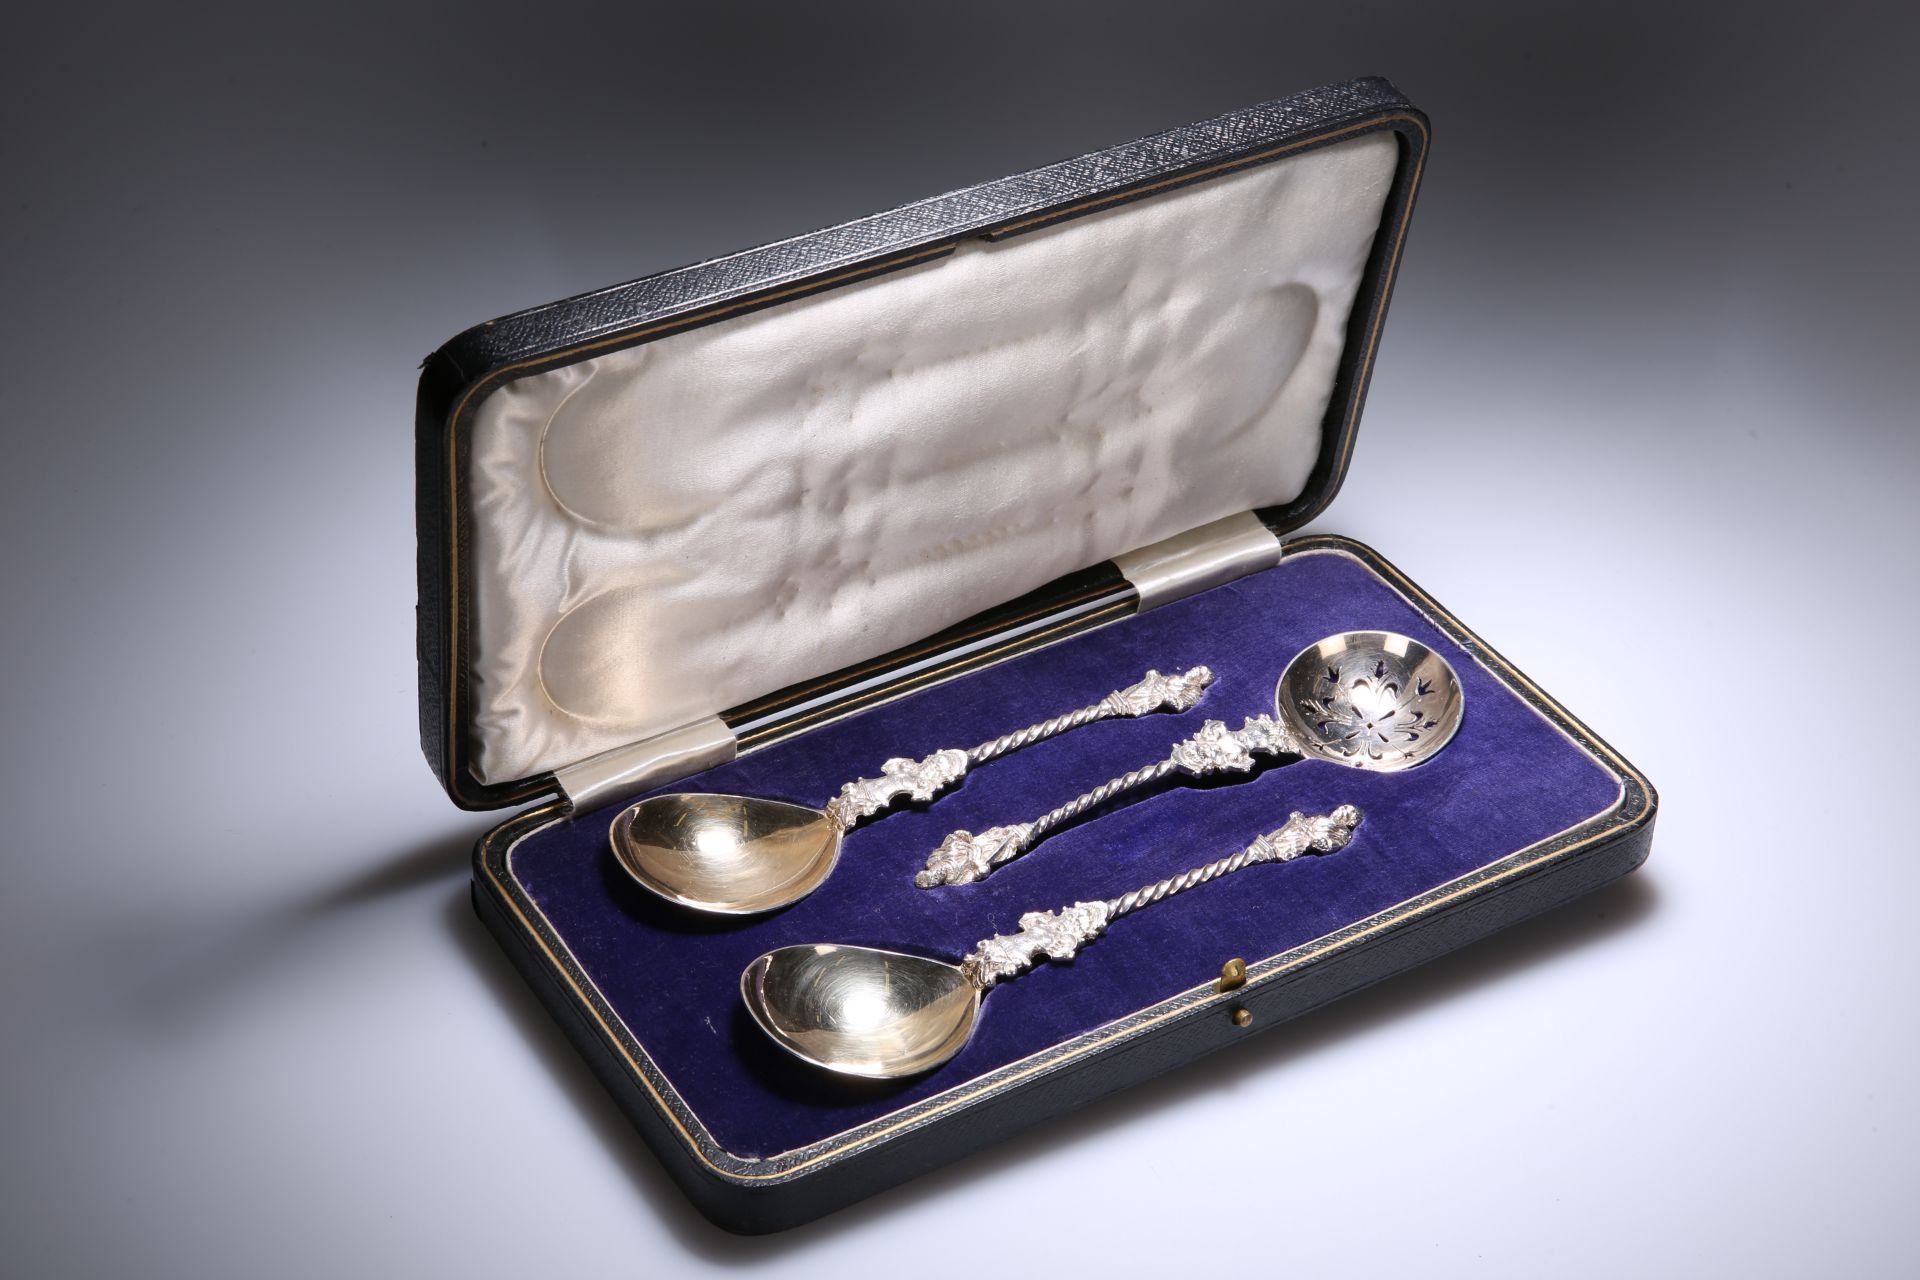 AN EDWARDIAN CASED SET OF SILVER-PLATED APOSTLE FRUIT SPOONS AND A SUGAR SIFTING SPOON